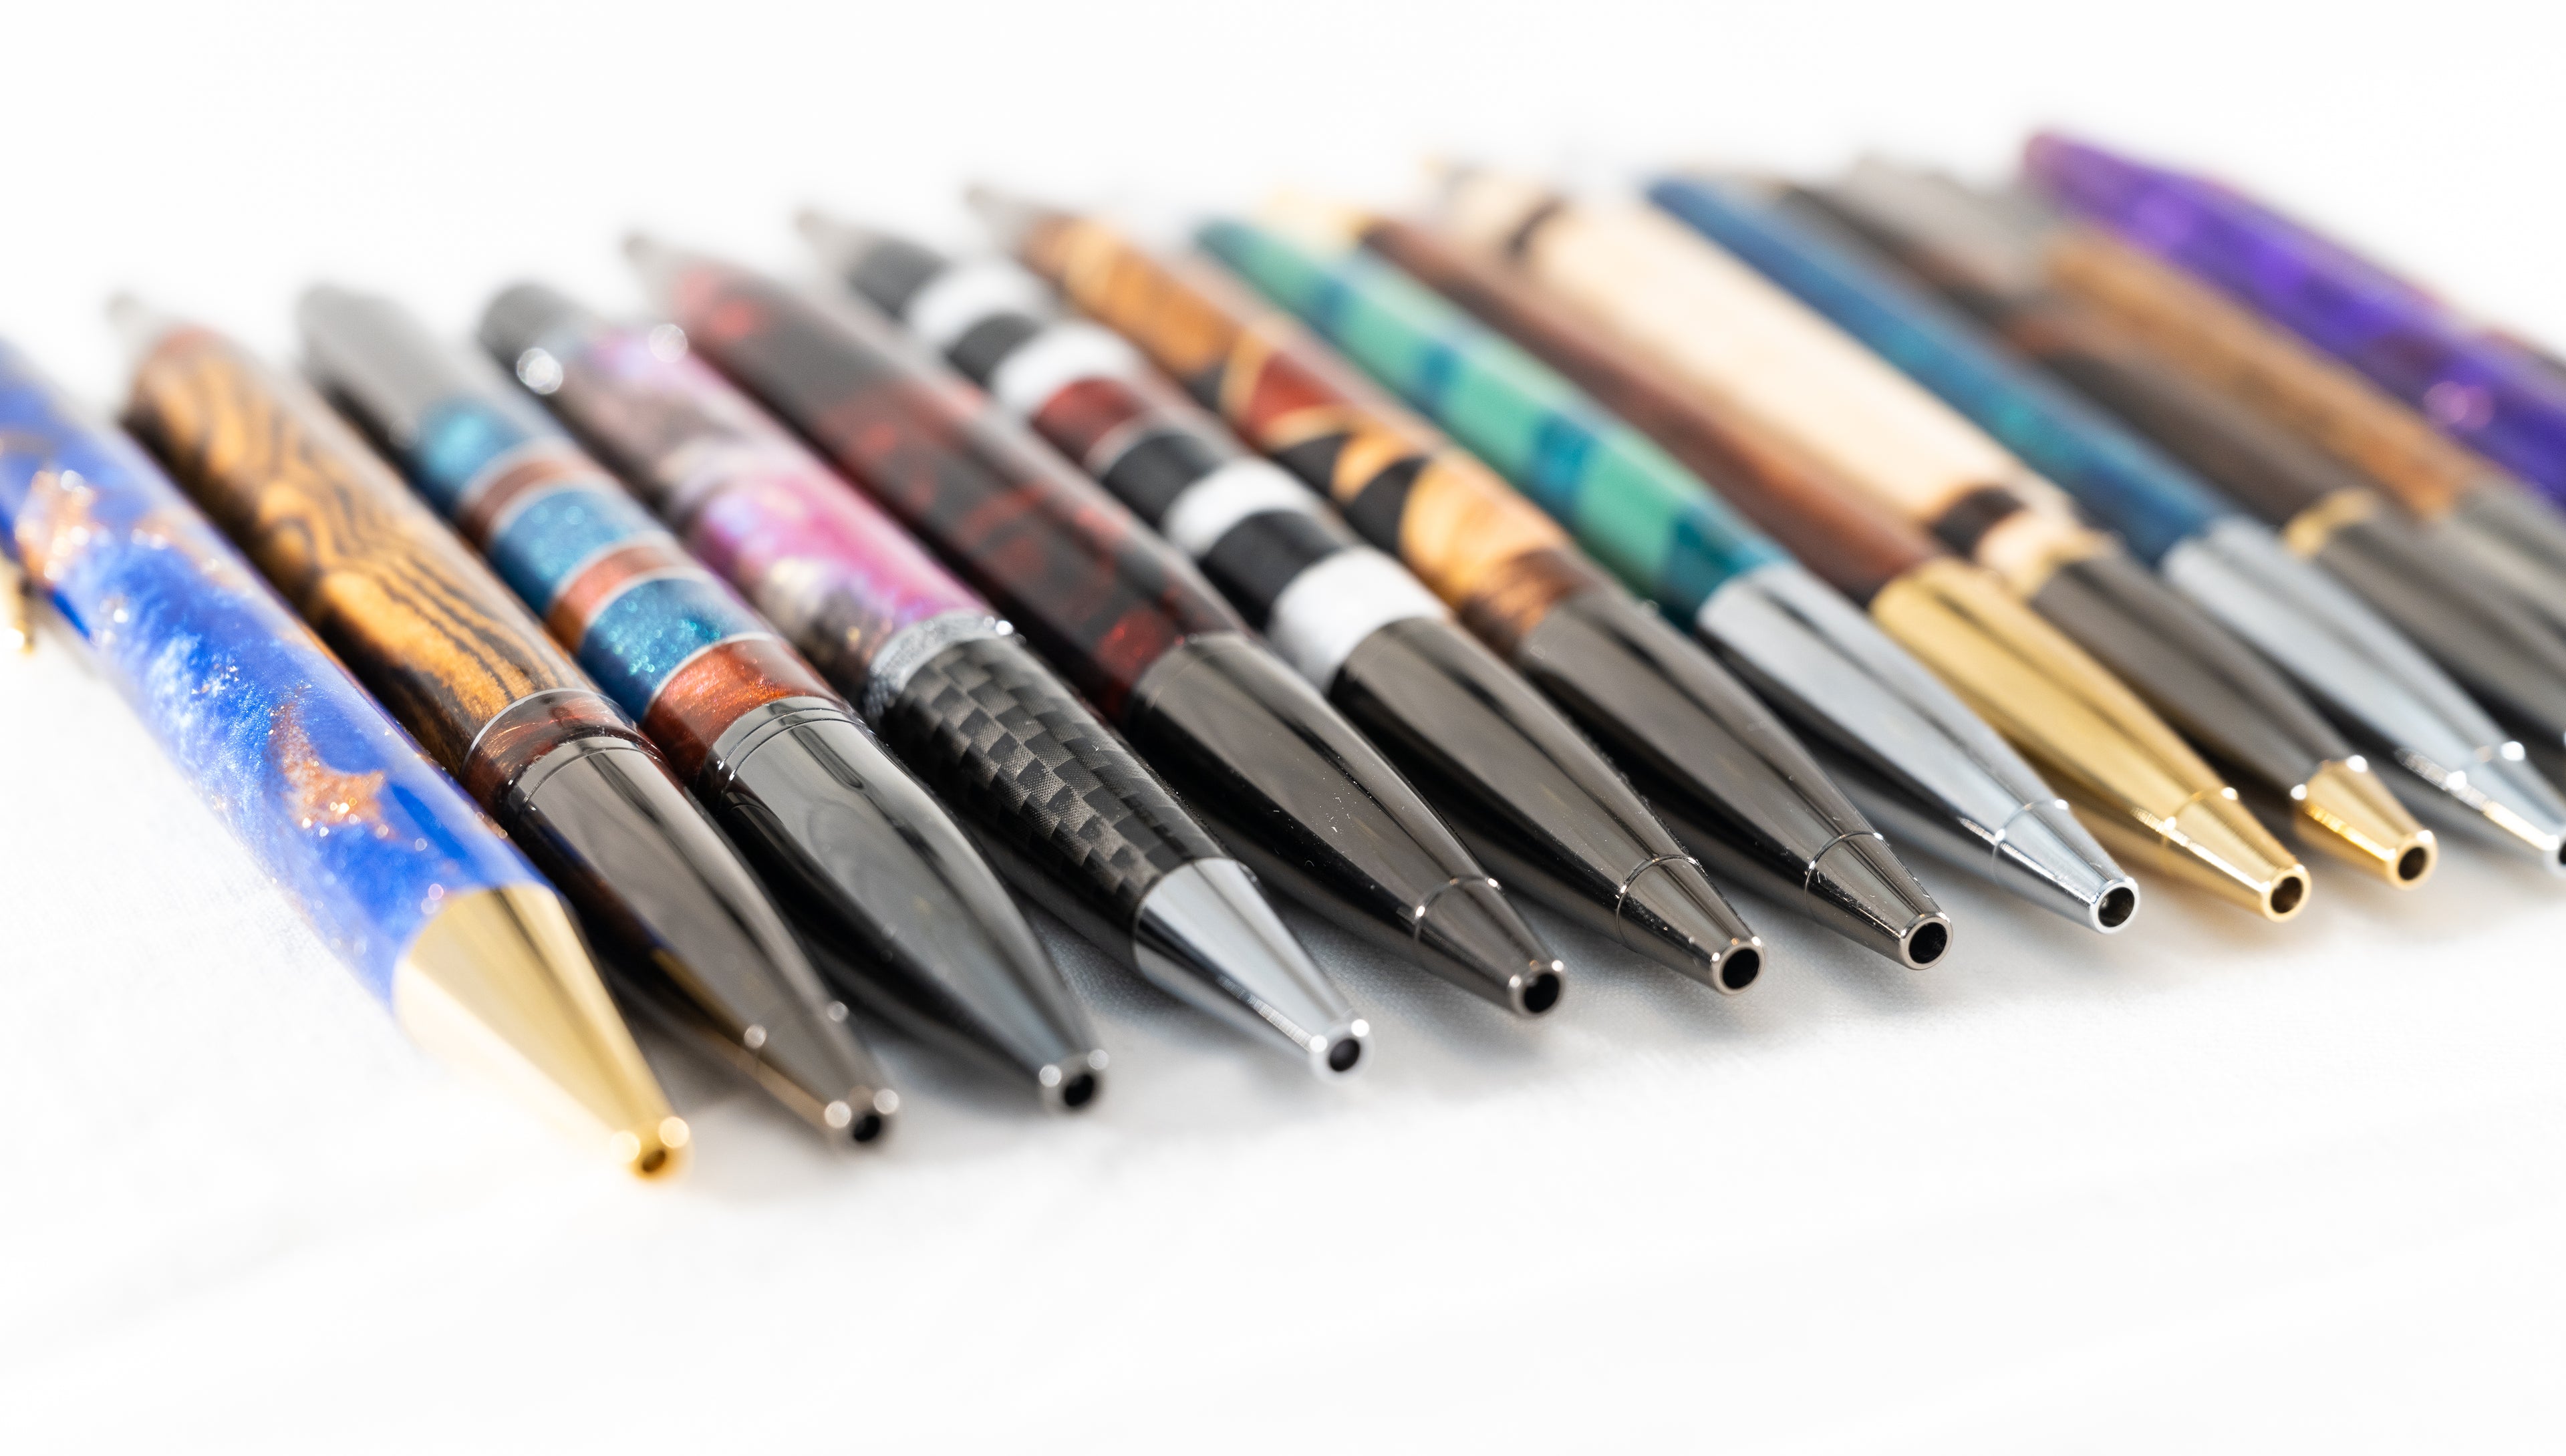 A row of handmade wood and resin click and twist ballpoint pens arranged in a line.